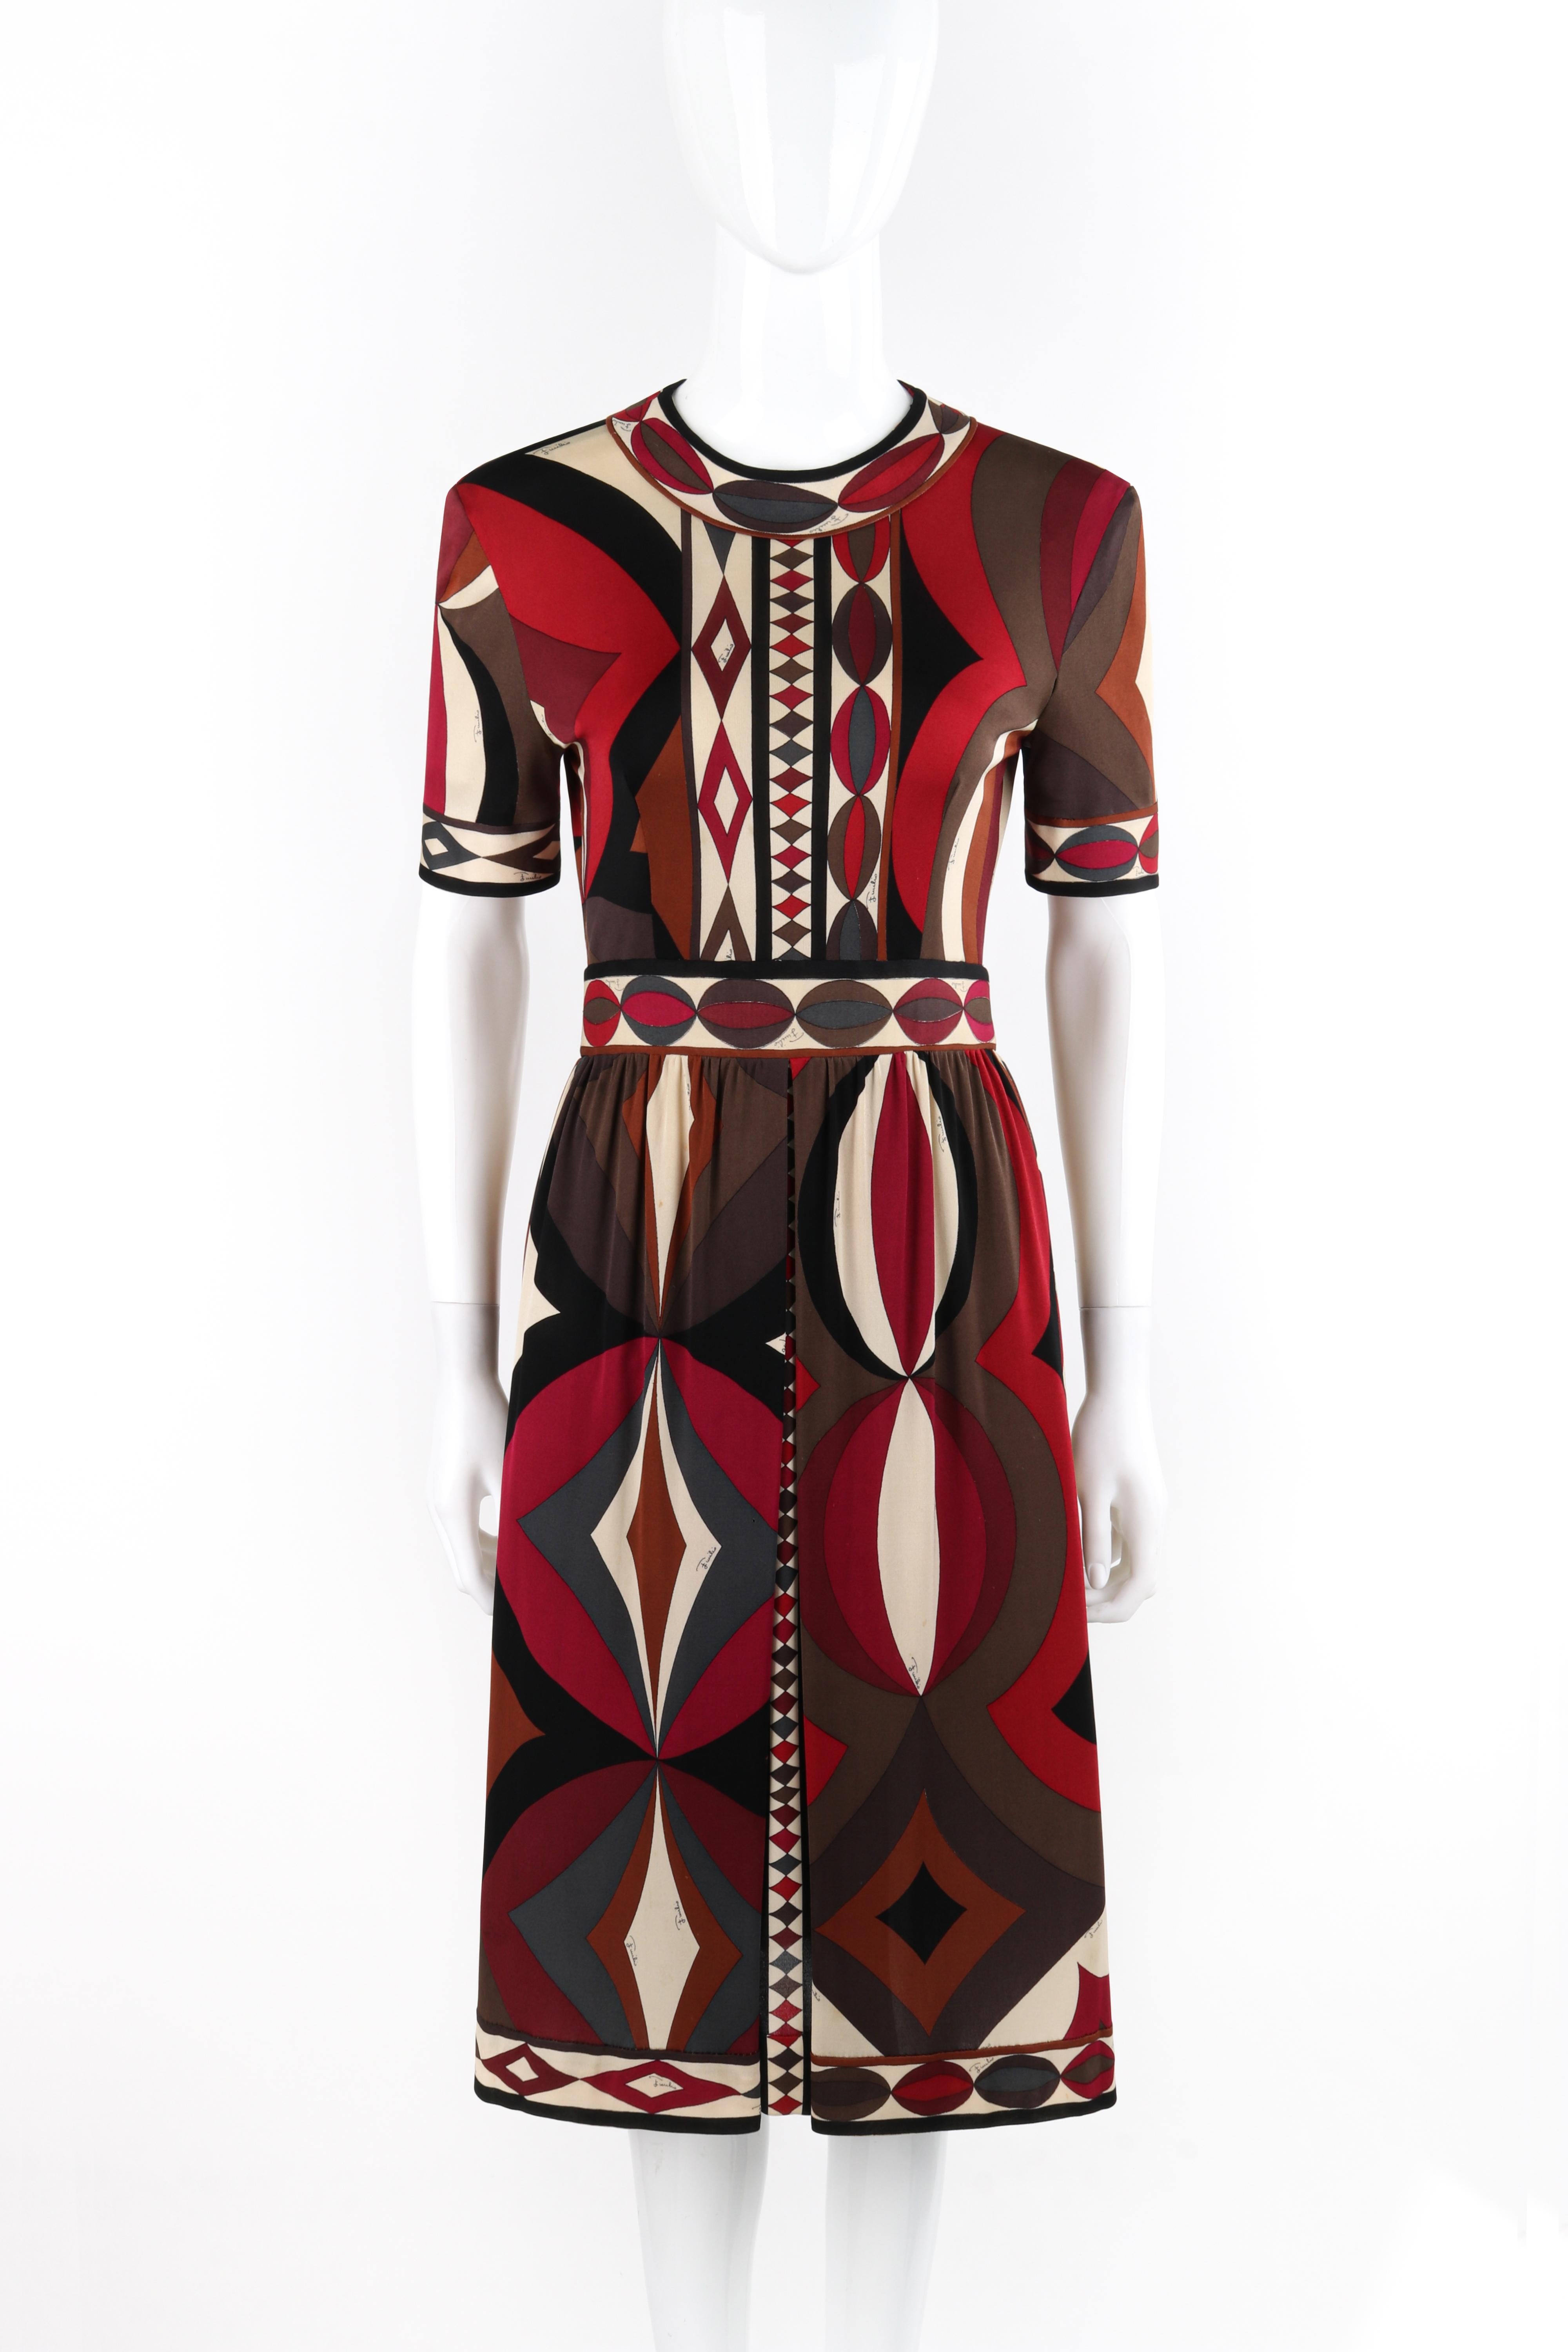 EMILIO PUCCI c.1960s Multicolor Silk Geometric Print Short Sleeve Pleated Dress

Brand / Manufacturer: Emilio Pucci
Circa: 1960s
Designer: Emilio Pucci
Style: Short sleeve dress
Color(s): Shades of pink, black, white, brown, gray, purple
Lined: